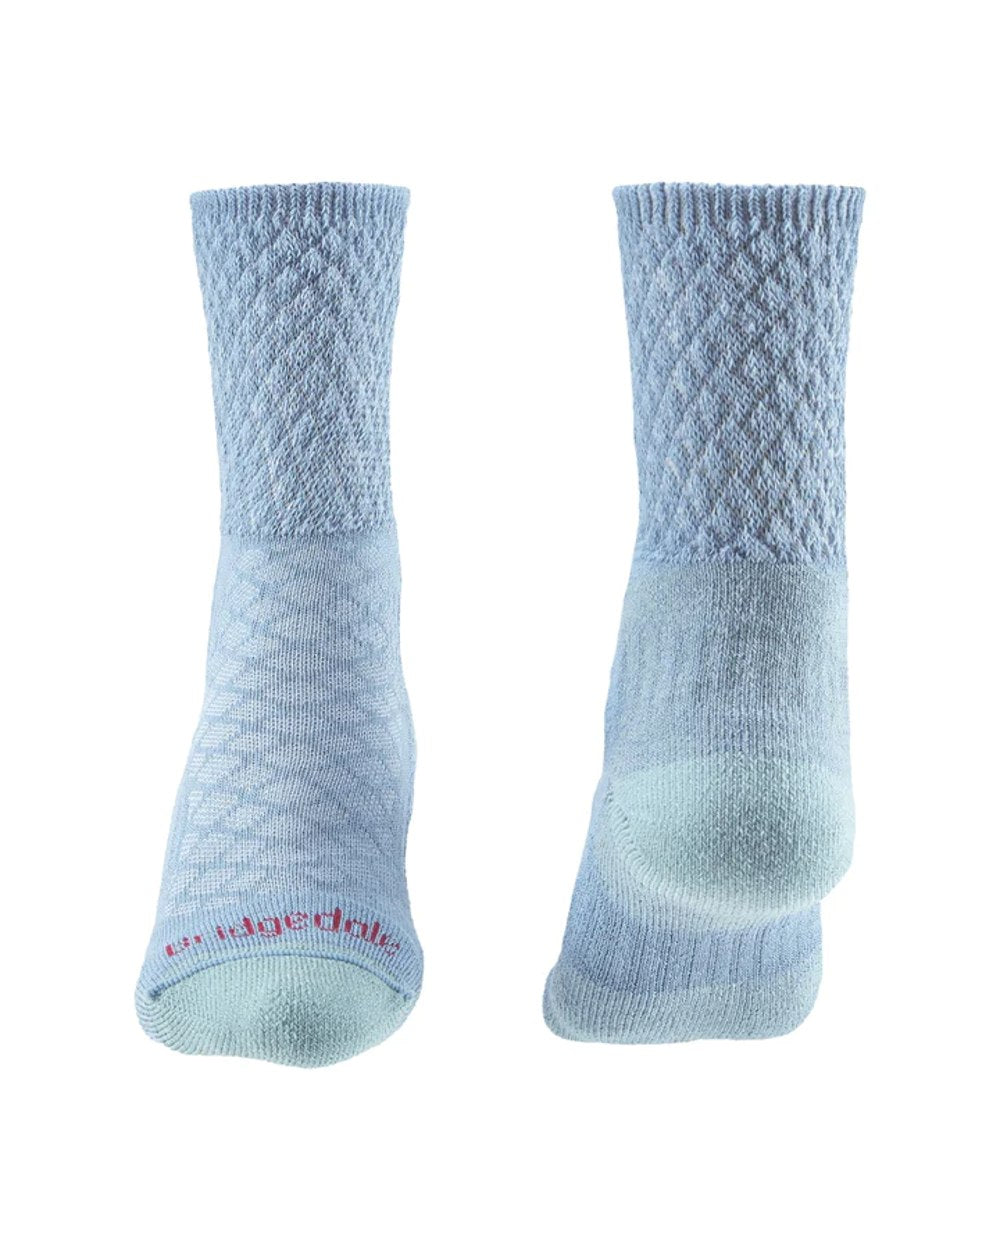 Front and back Powder Blue coloured Bridgedale Womens Lightweight Merino Comfort Boot Socks on a white background 